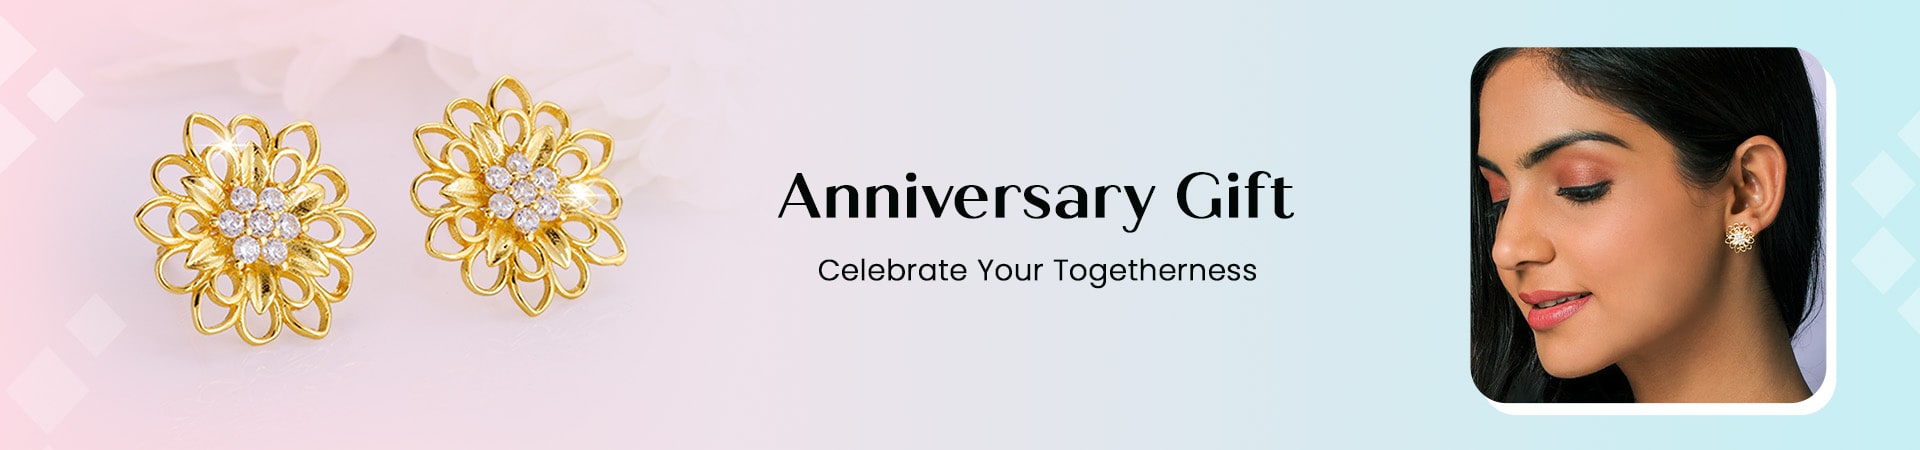 Anniversary Gifts For Couples | Marriage Anniversary Gifts For Couple |  GiftaLove